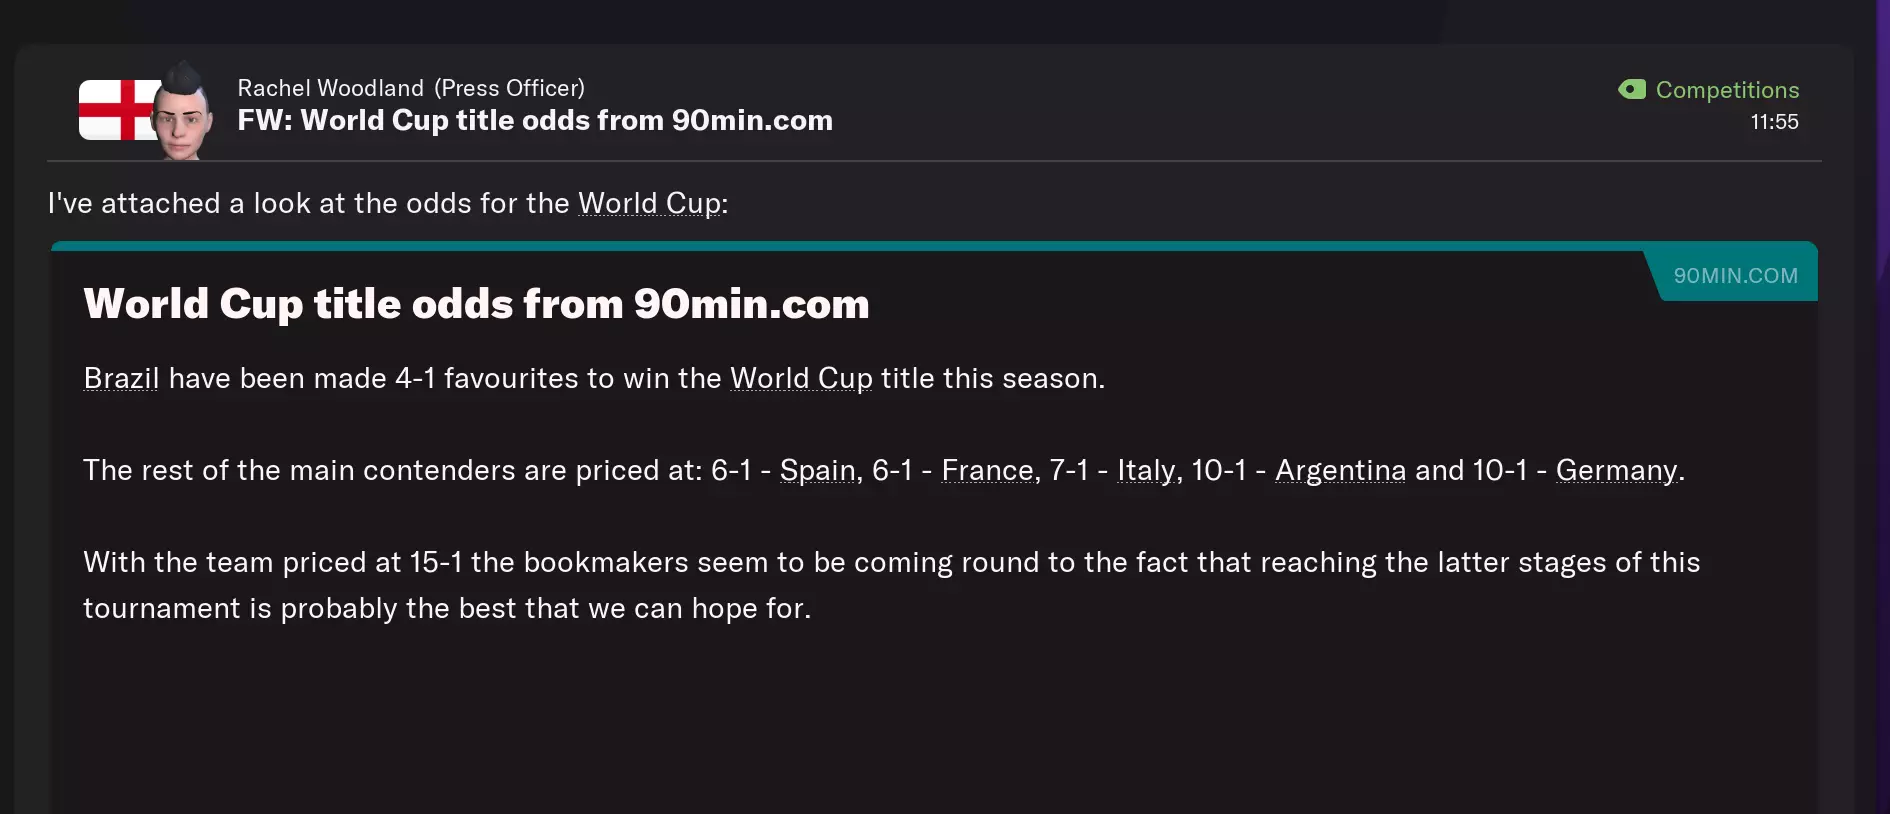 The bookies don't rate England's chances. Image credit: Football Manager 2022